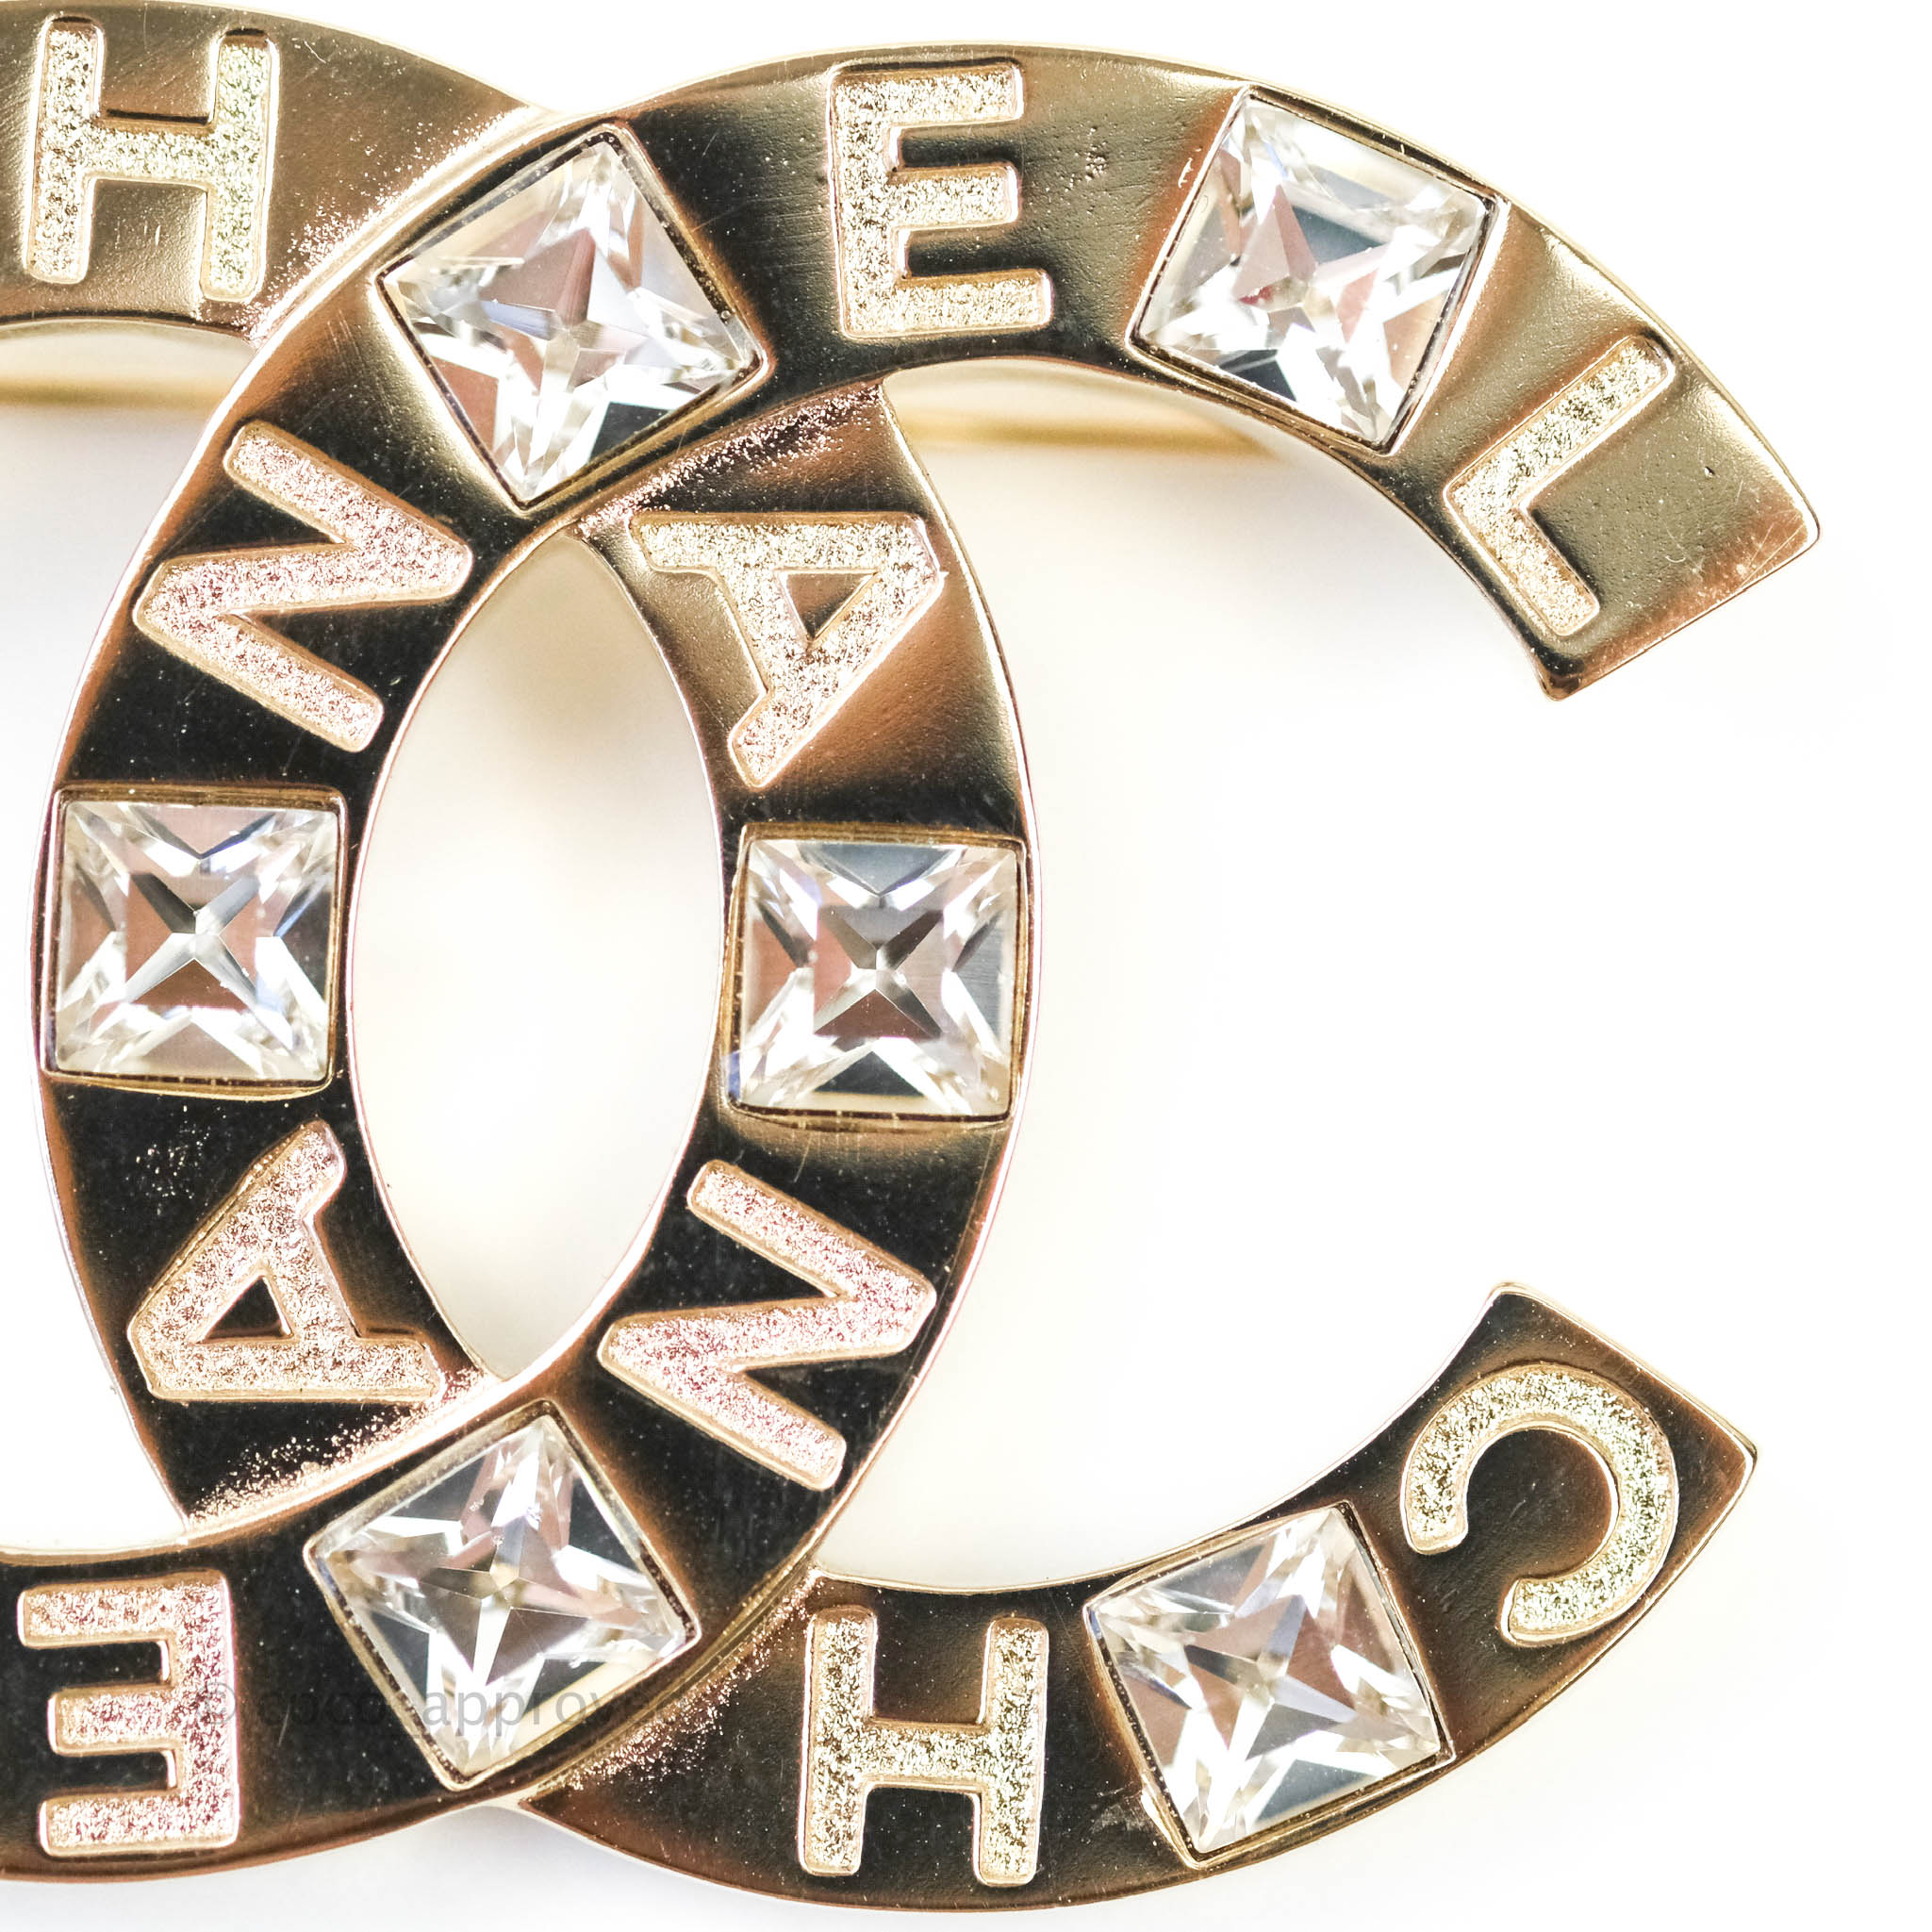 Chanel CC Crystal Brooch Gold Tone 21A – Coco Approved Studio